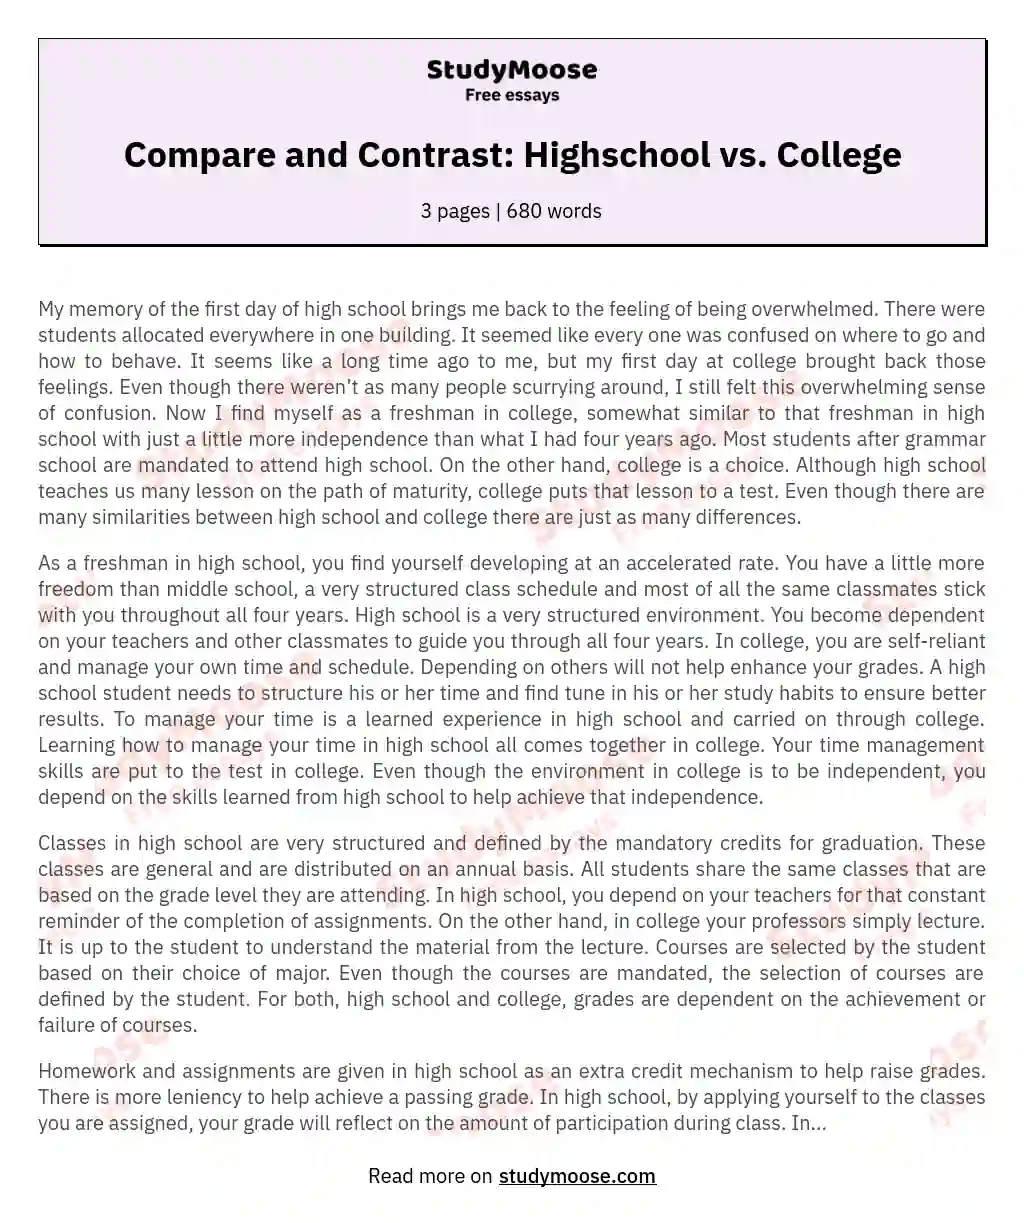 Compare and Contrast: Highschool vs. College essay